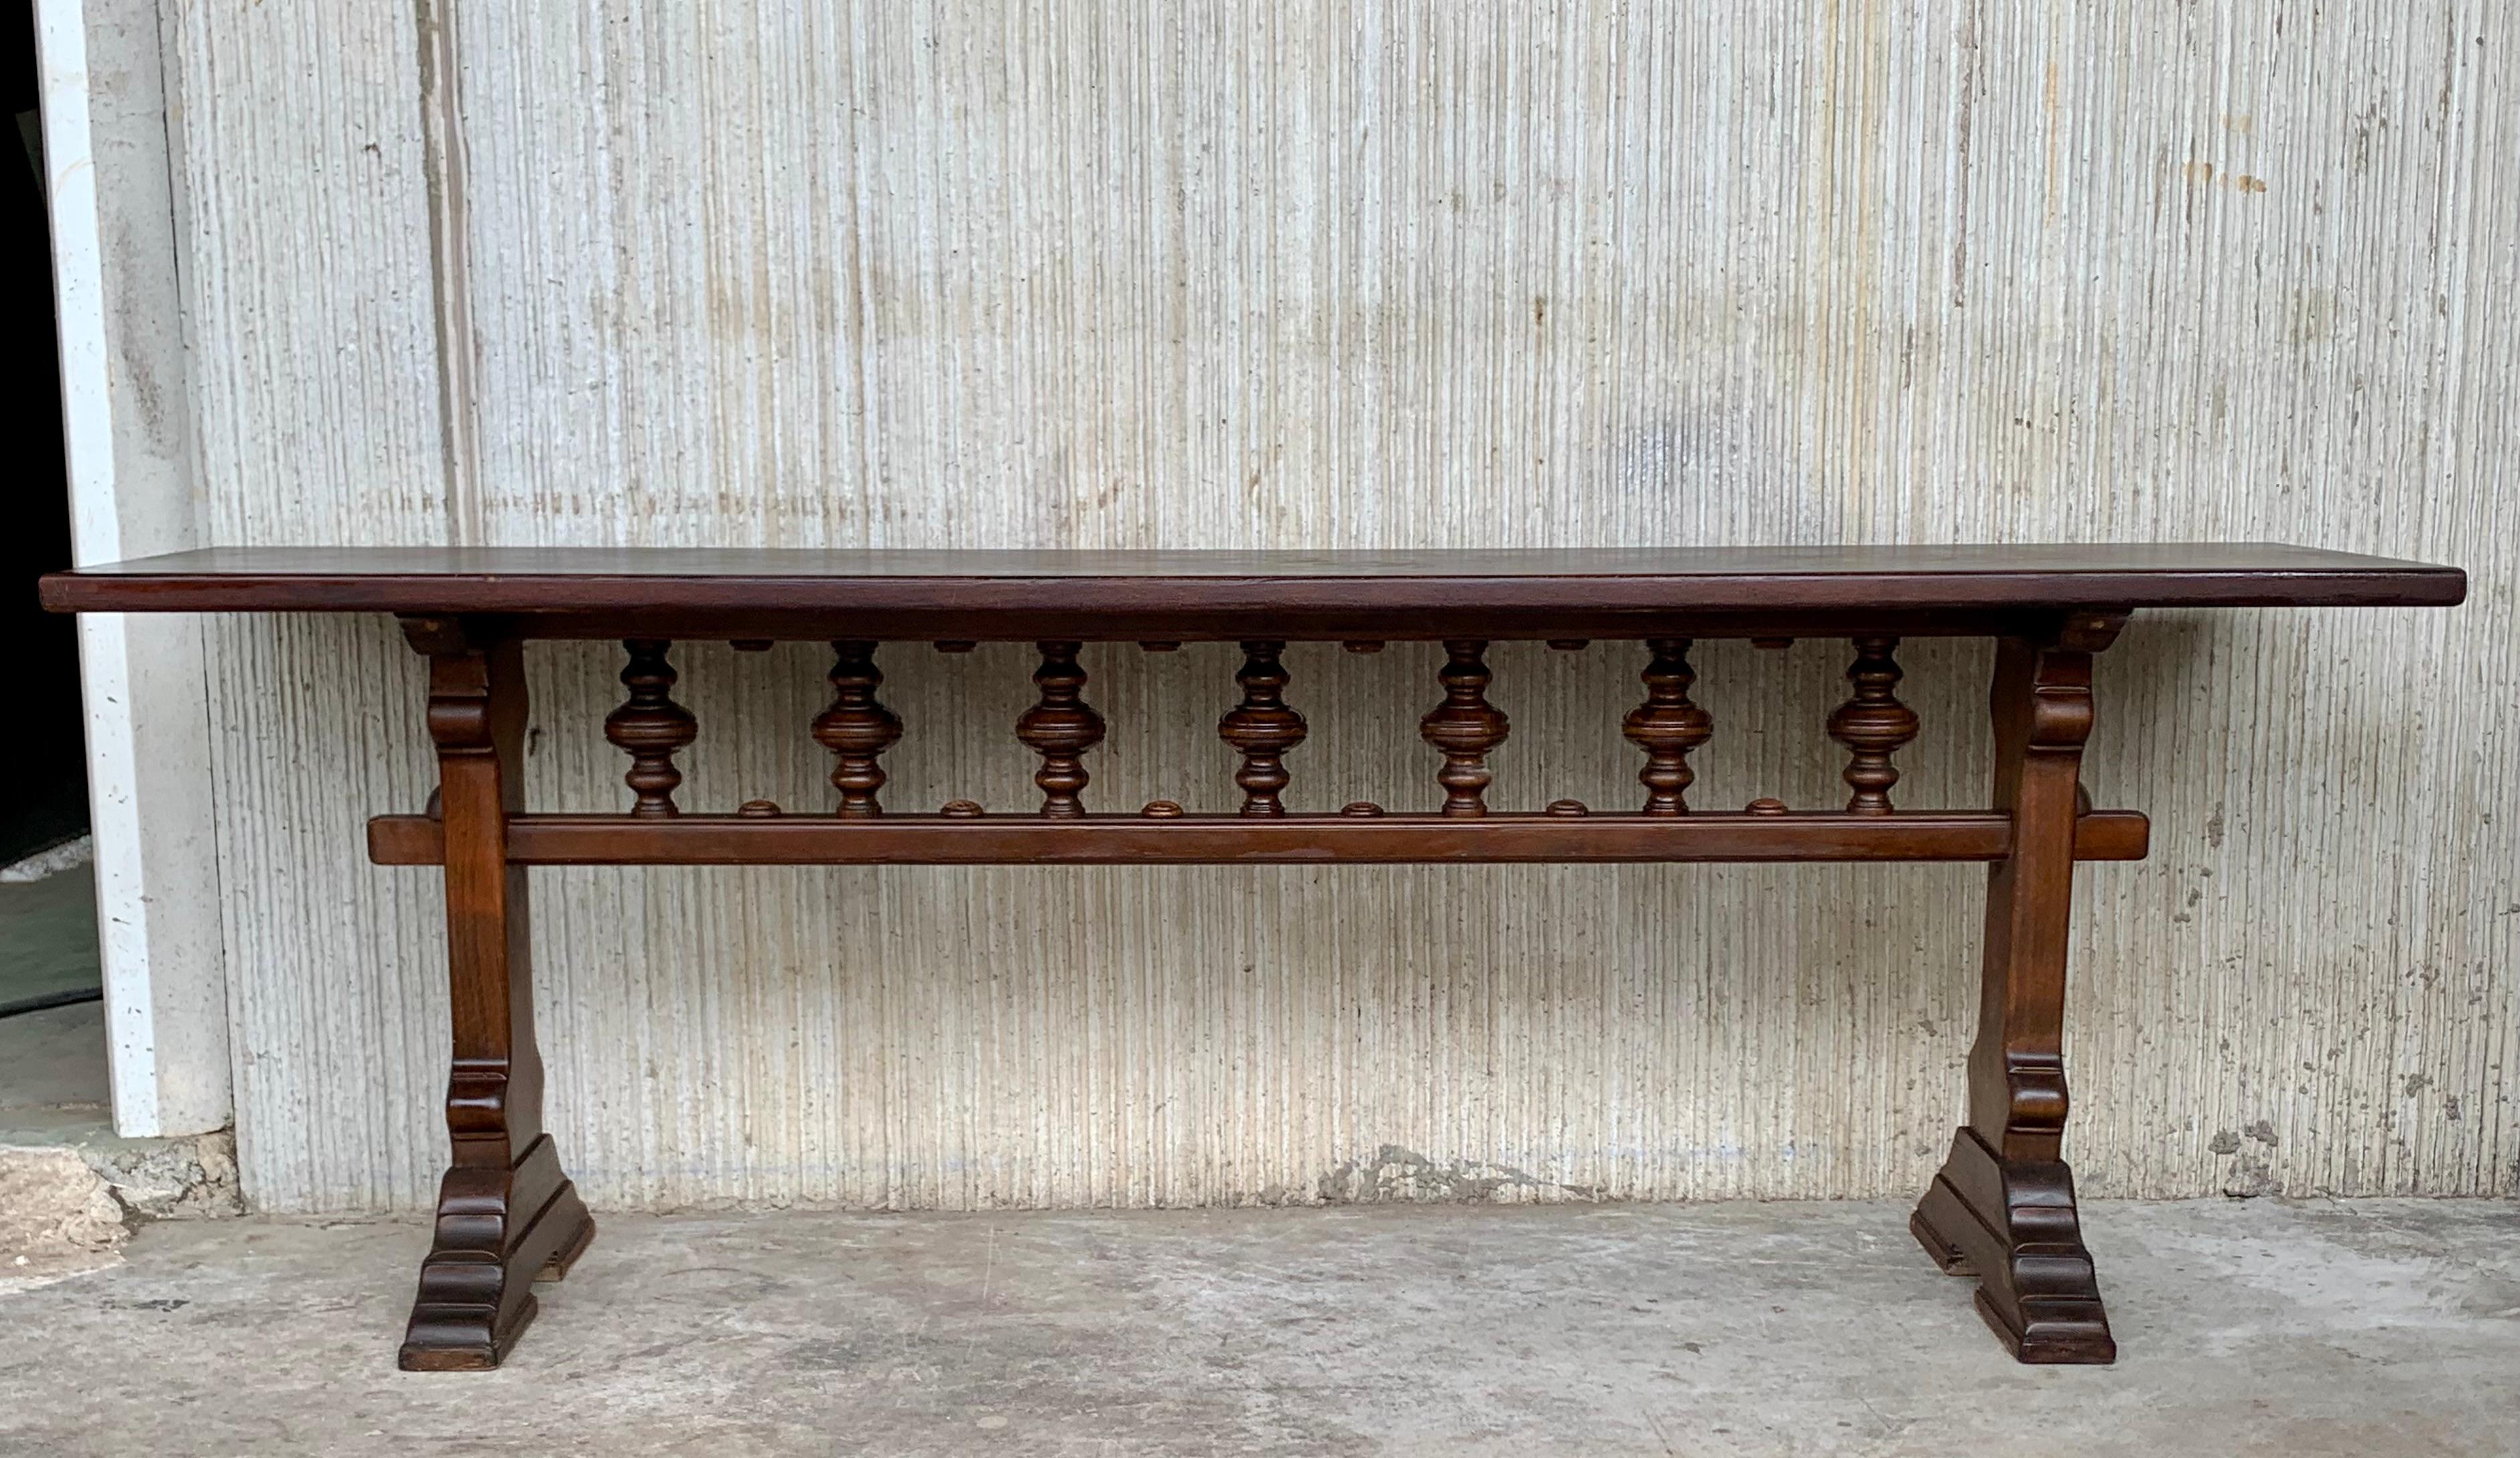 Early 20th Spanish console table with two pedestal legs joined by a carved bars stretcher.